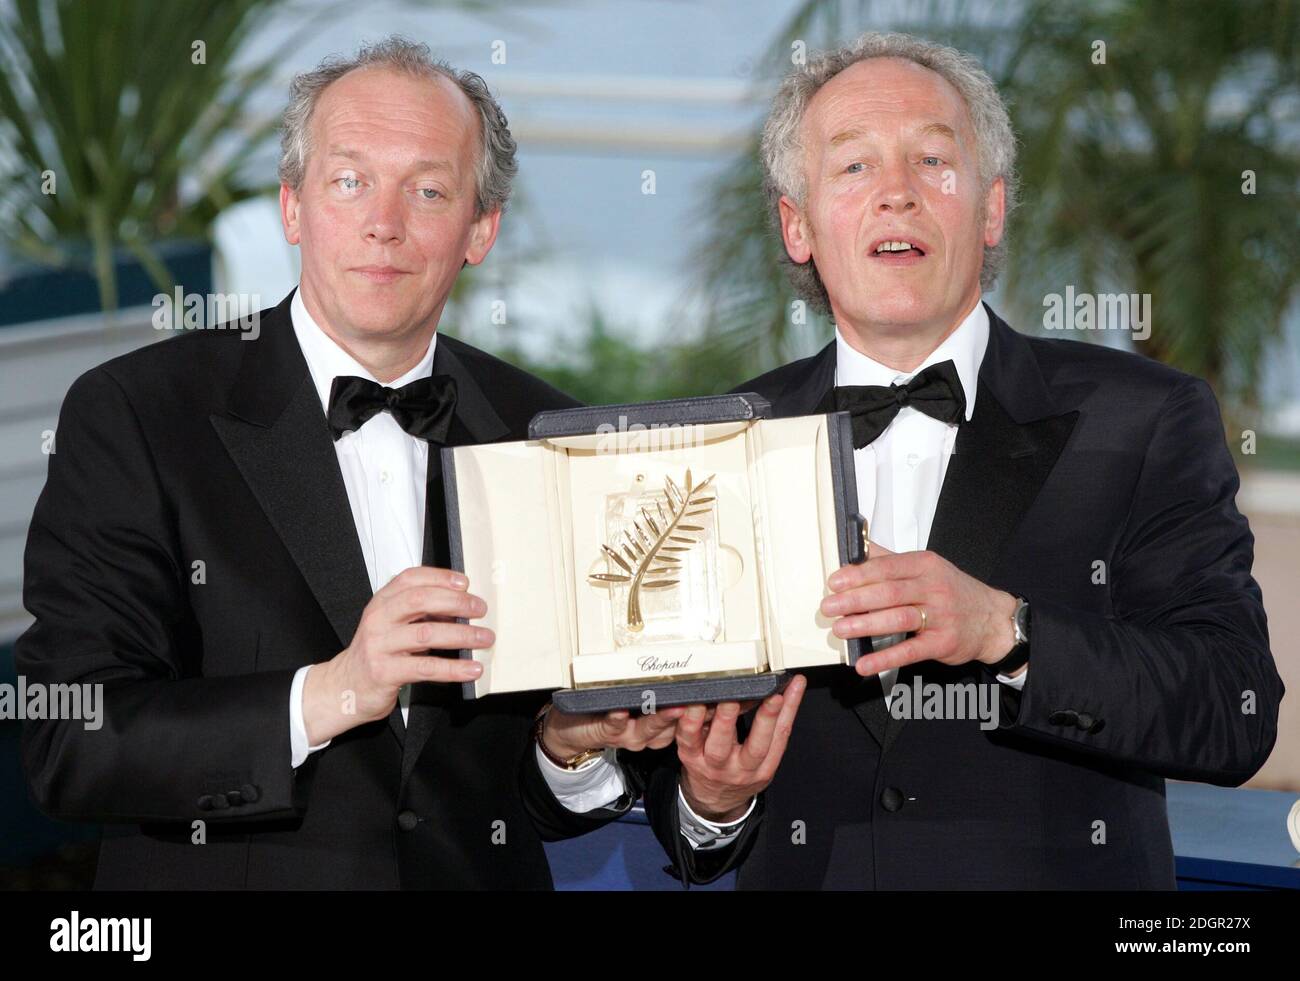 Luc Dardenne and Jean Pierre Dardenne, Winners of Palme d'Or Award for  "L'Enfant" at